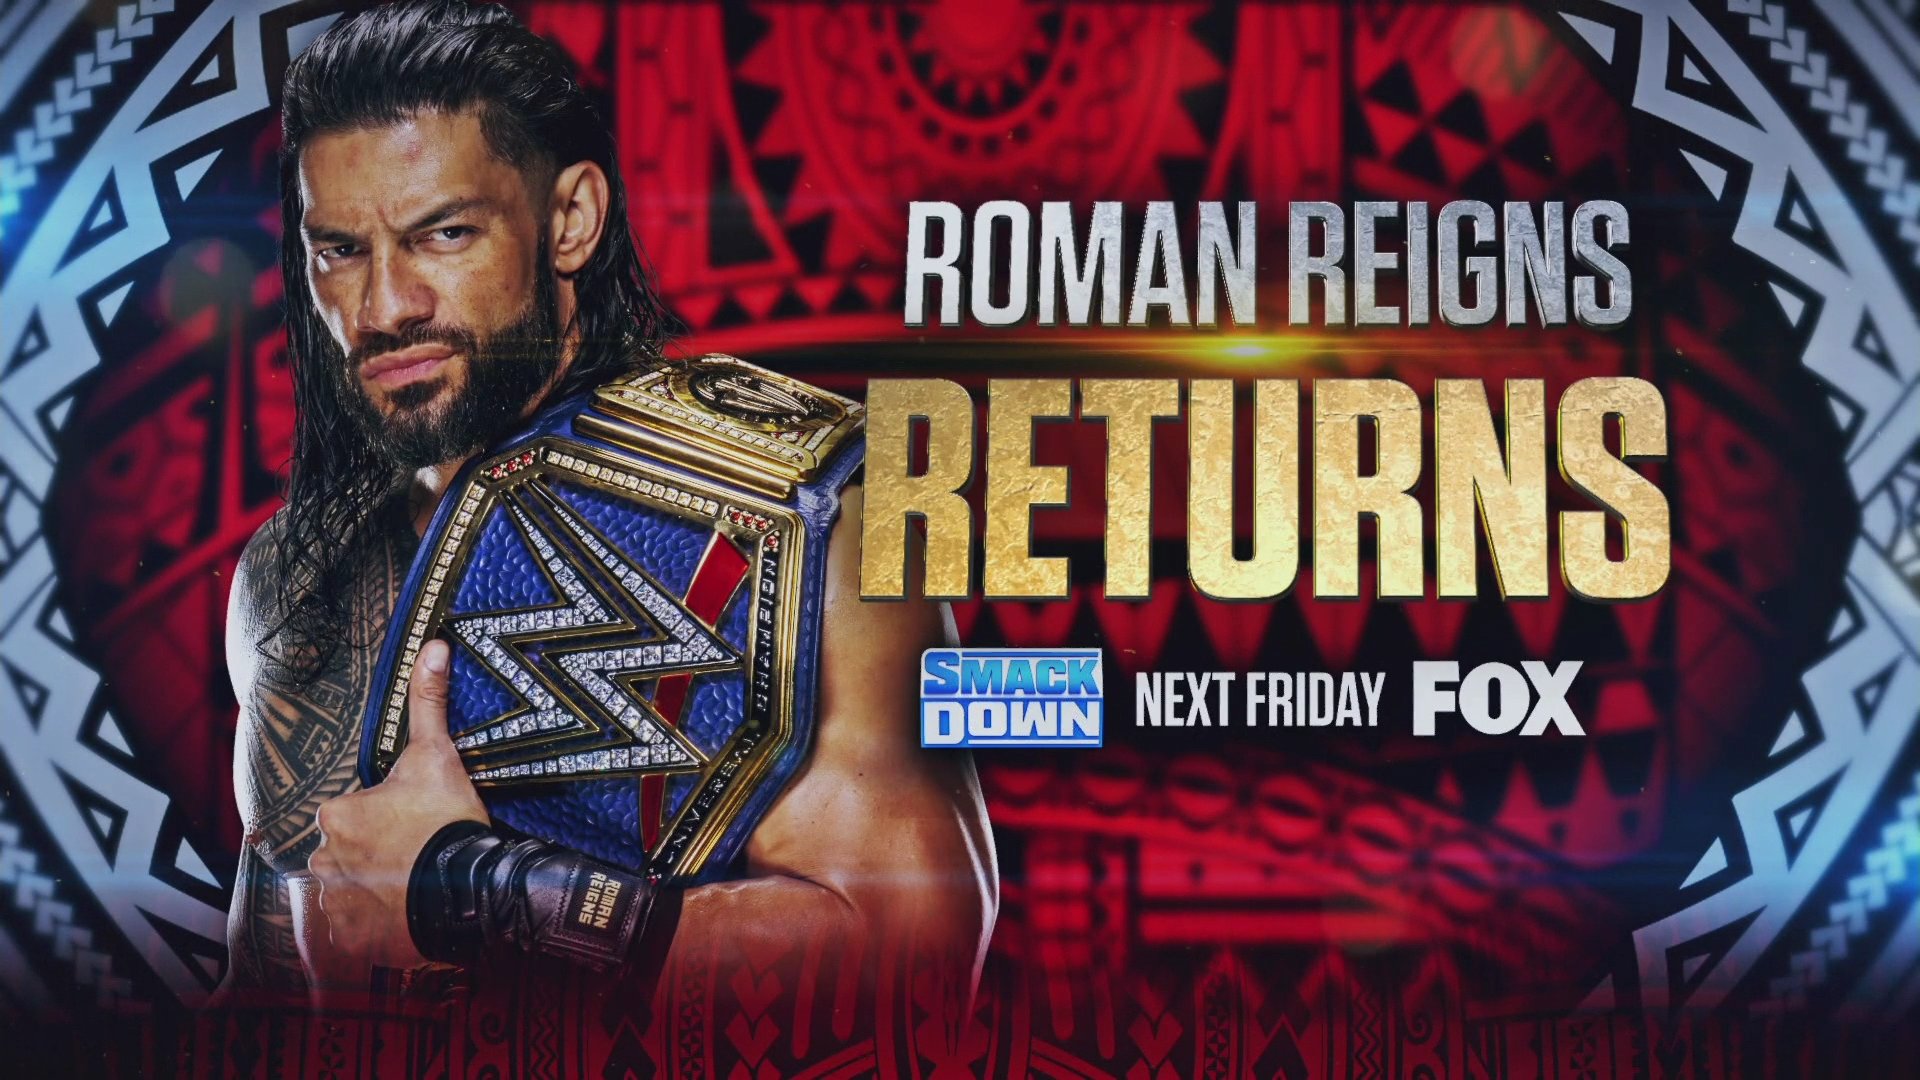 The Greatest in the World returns to #SmackDown! 📺 Next Friday 8e